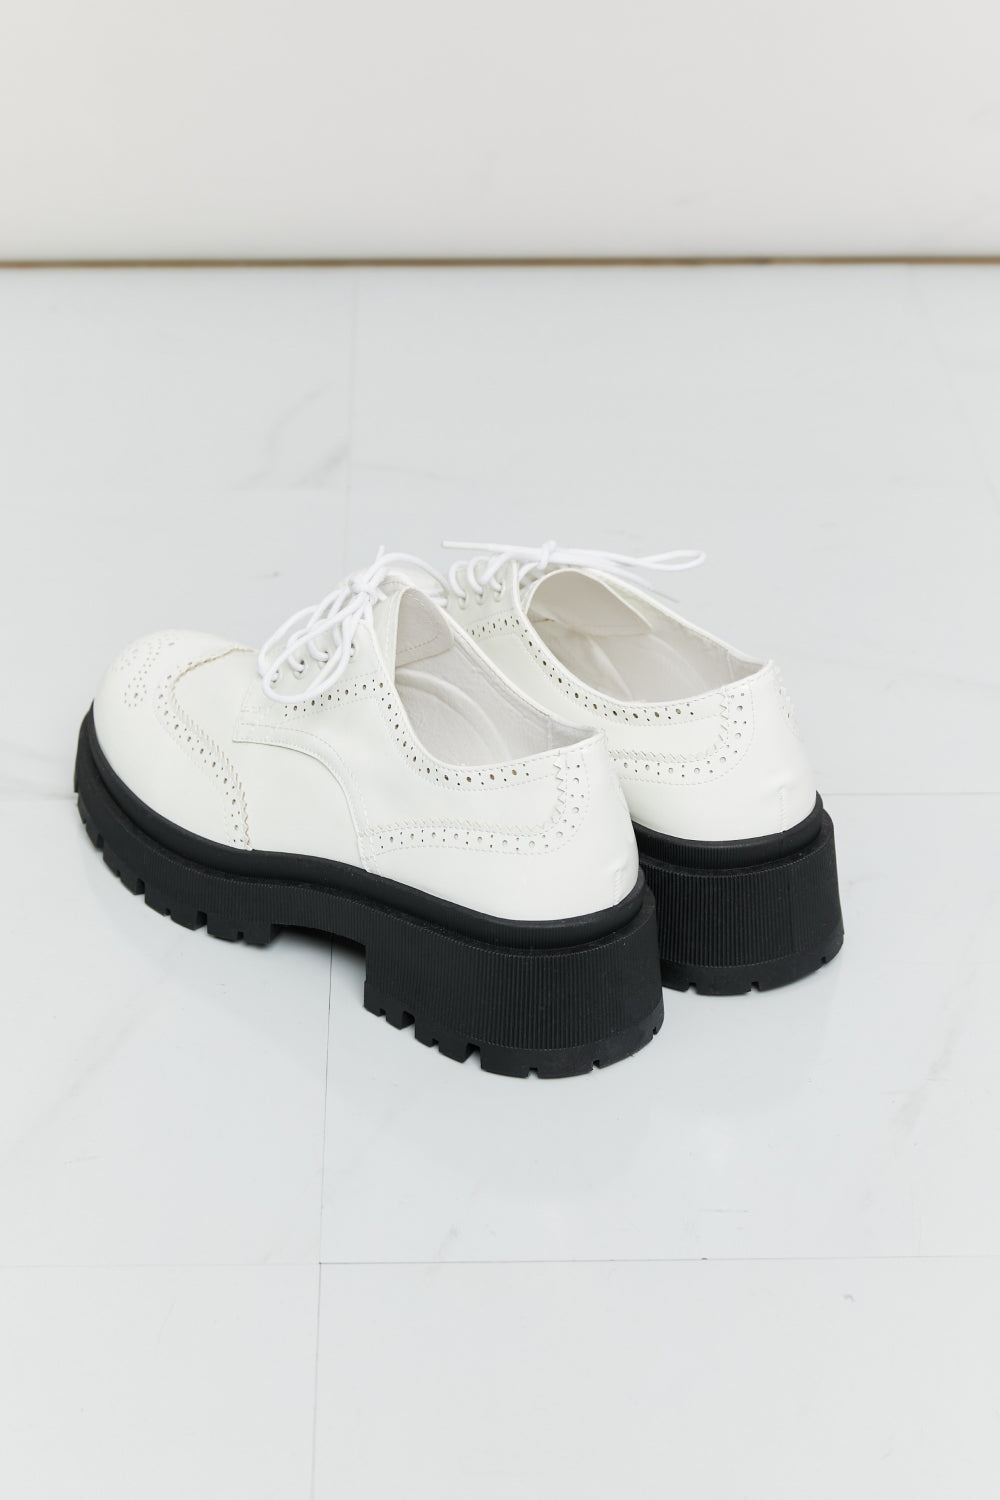 Womens White Wingtip Lace Up Oxford Brogue Loafers black platform 1.5 inch wing tip toe design 80s retro emo punk vibe alternative style unique chunky heel shoe